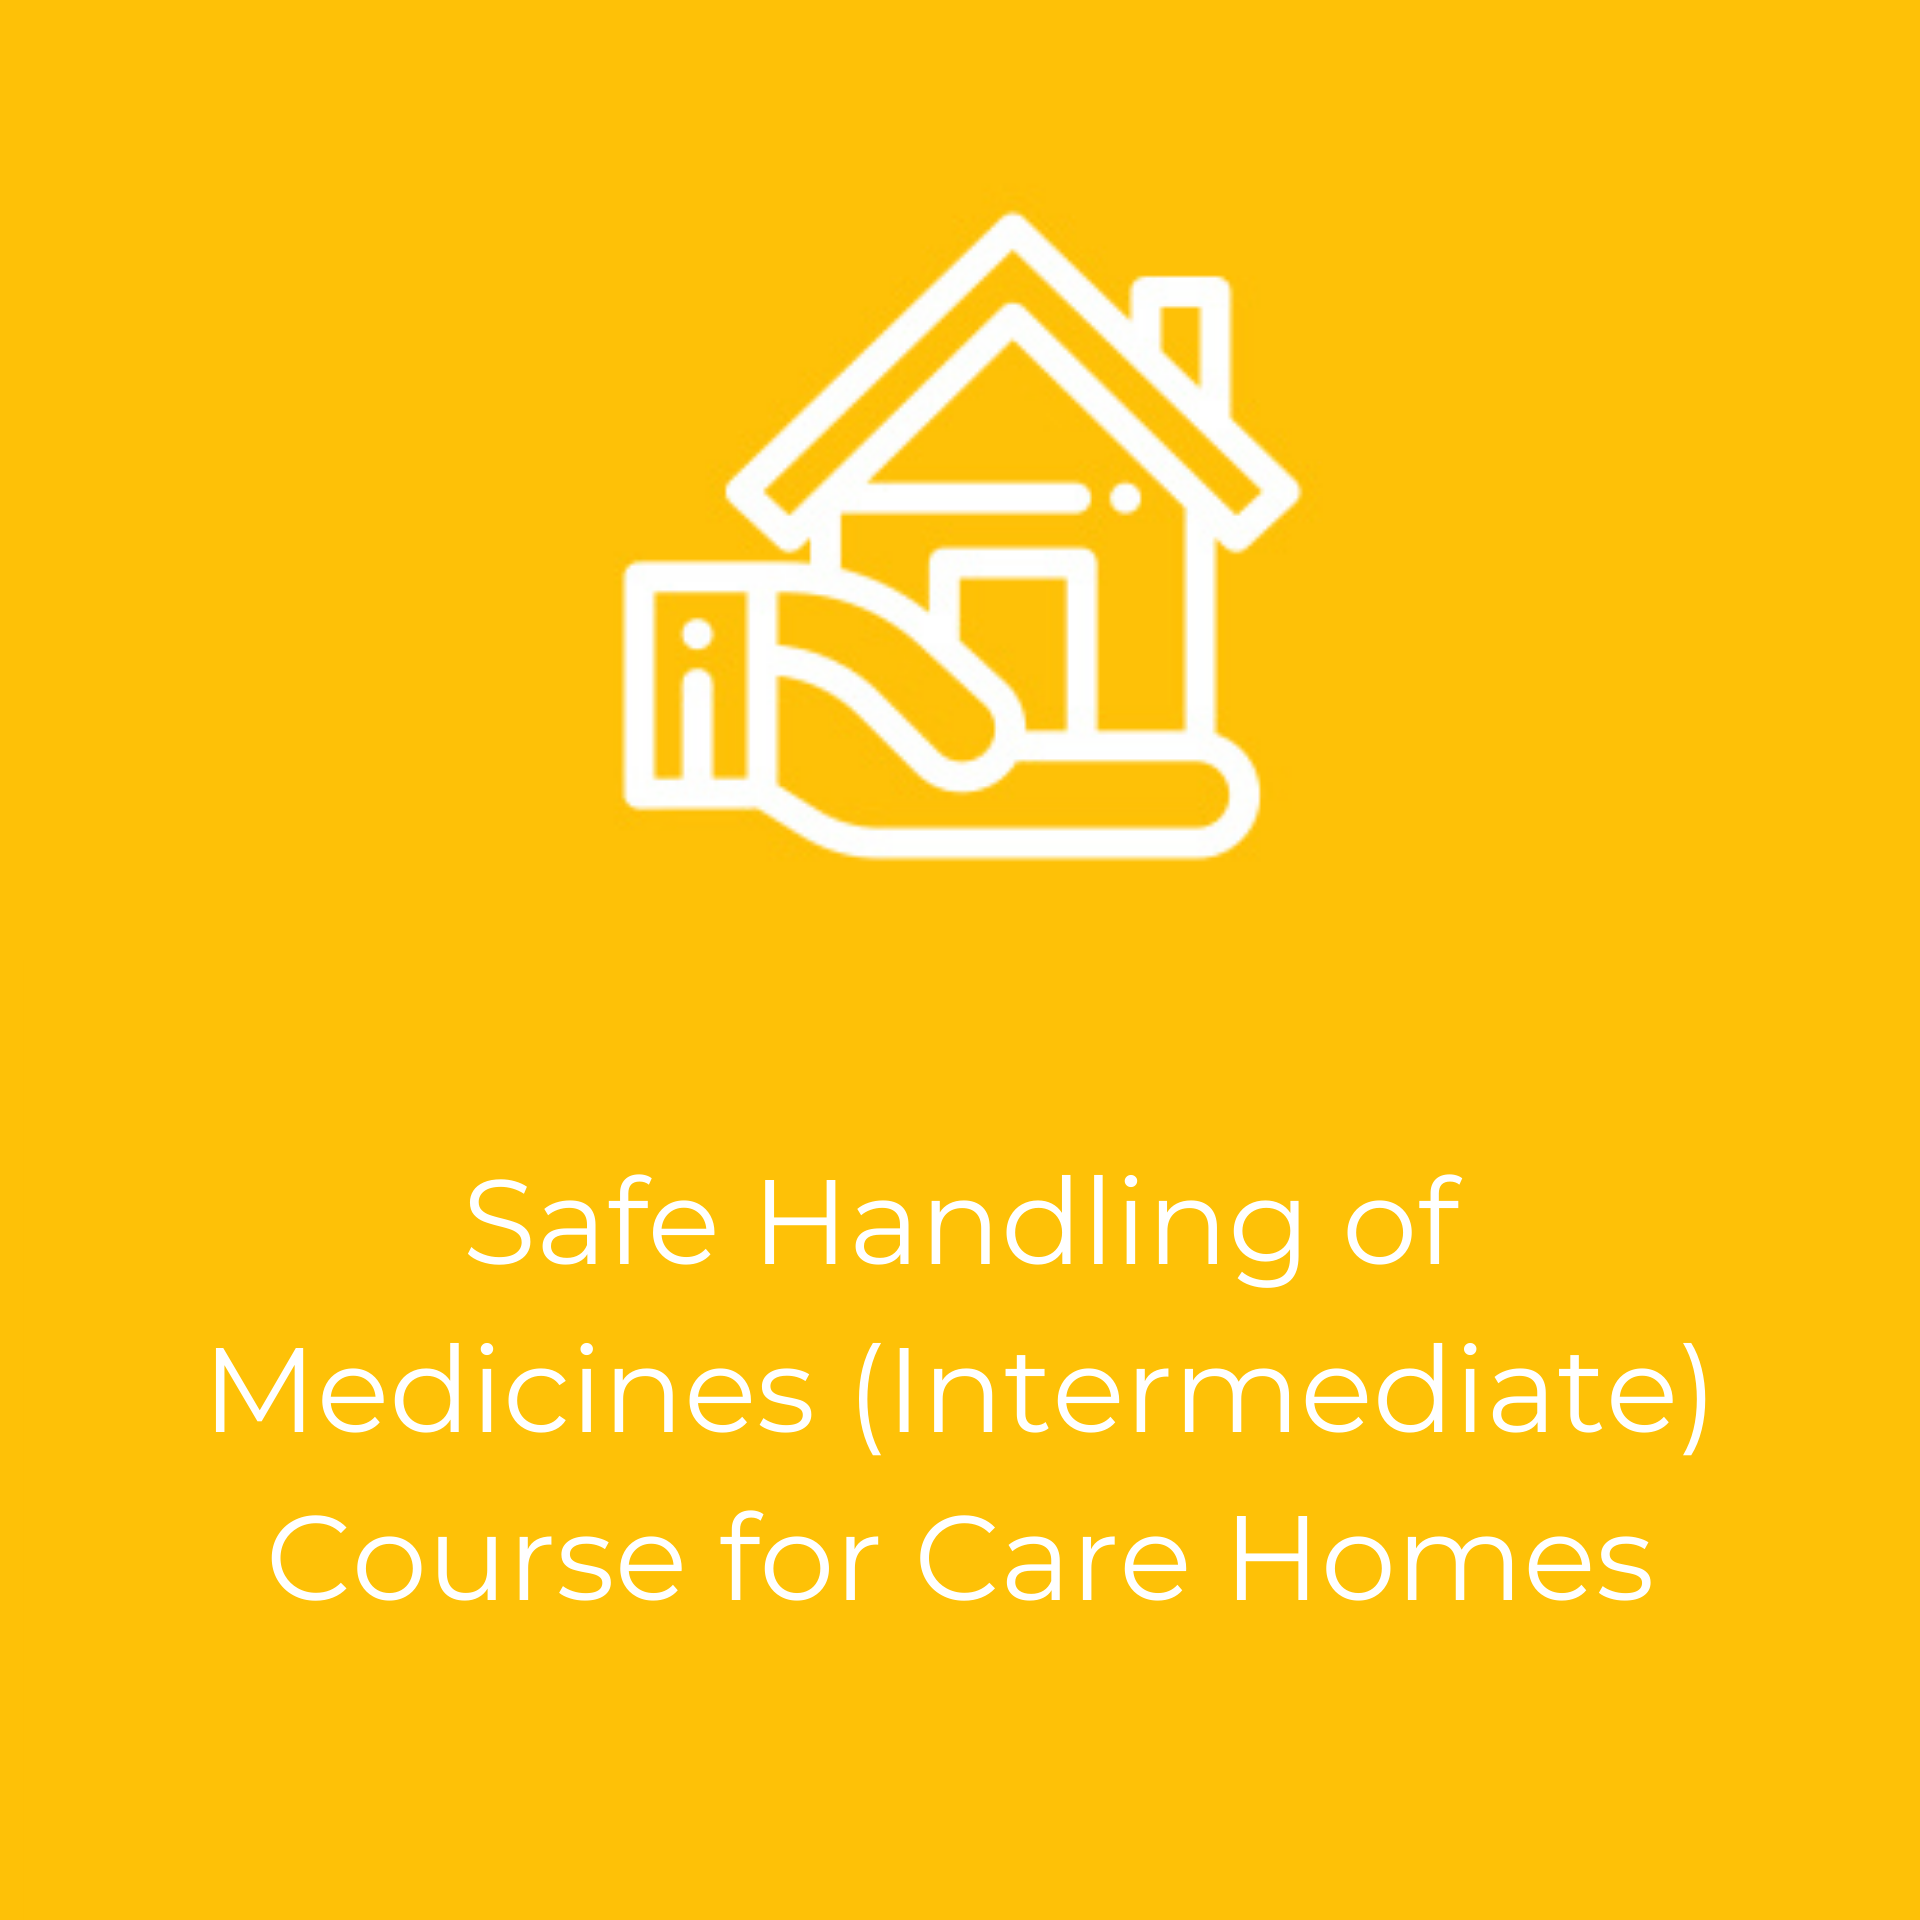 Safe Handling of Medicines (Intermediate) Course for Care Homes